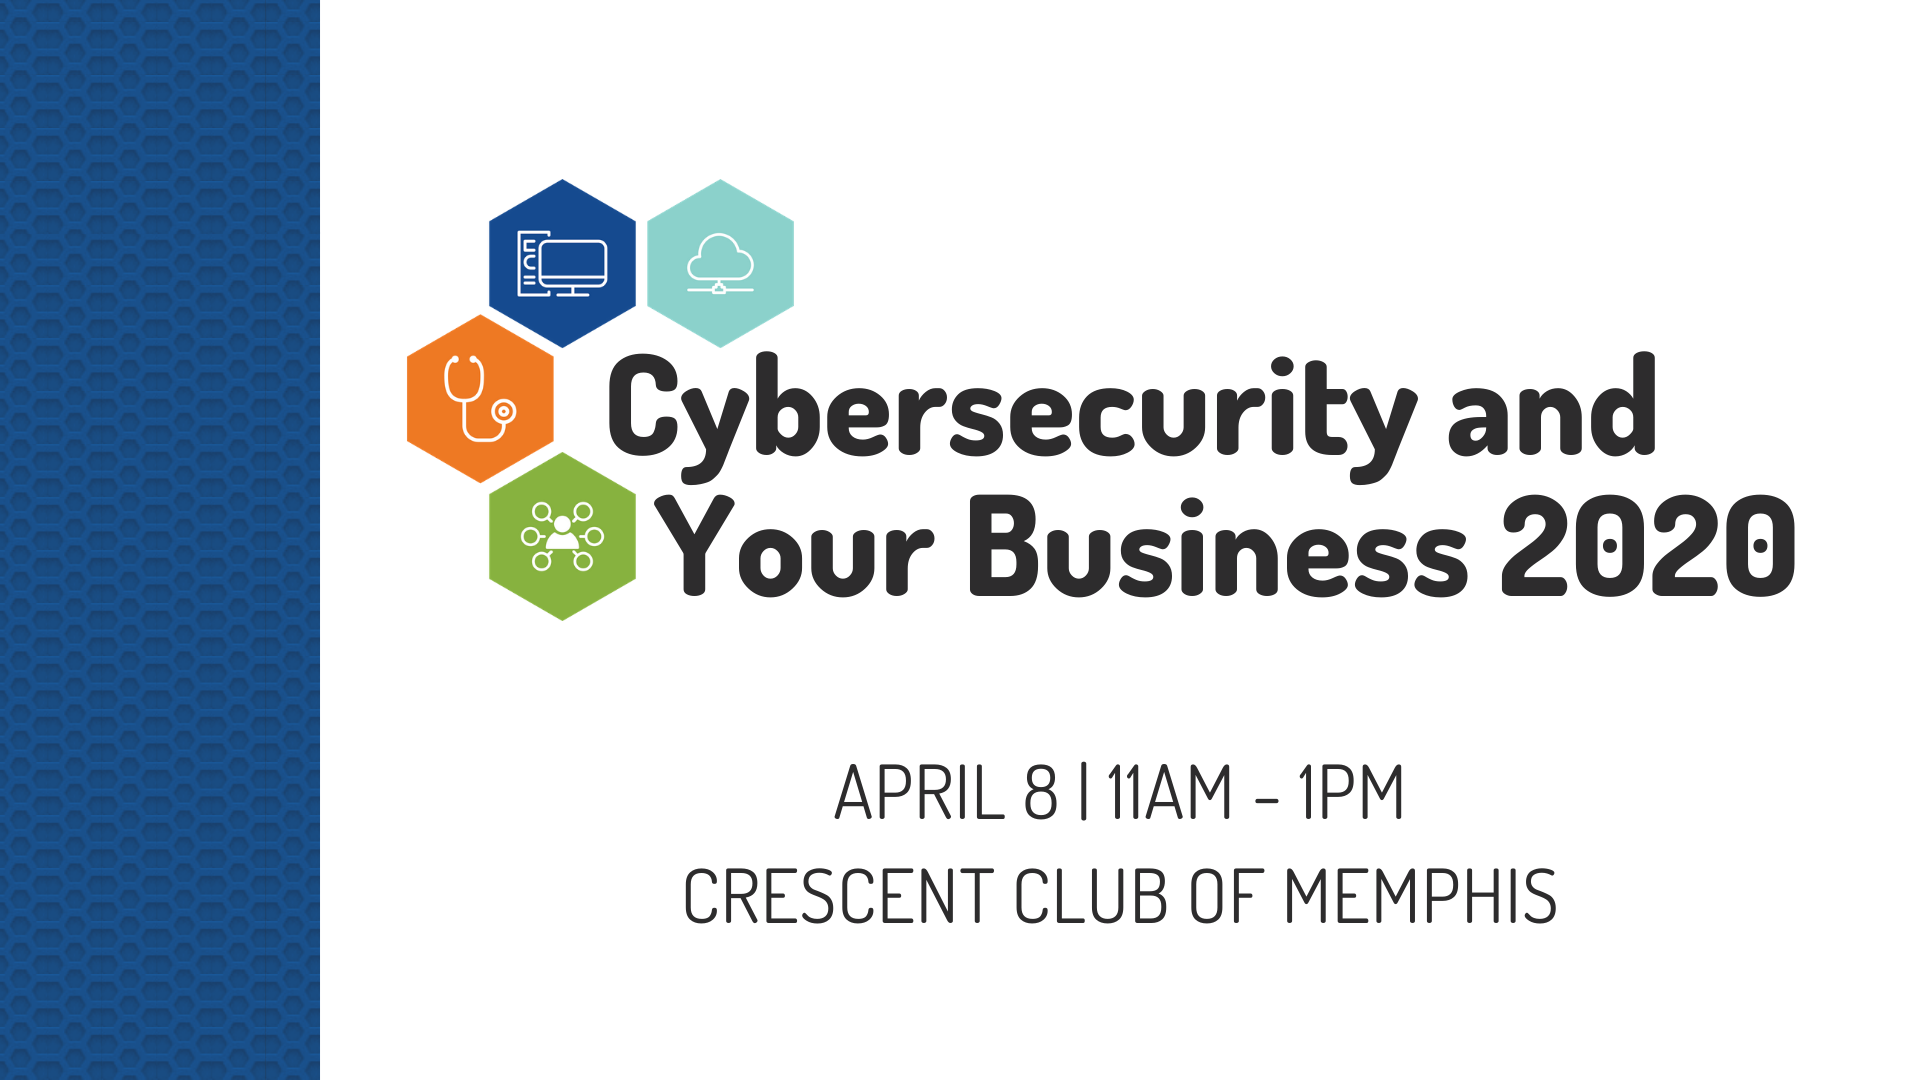 Cybersecurity and Your Business 2020